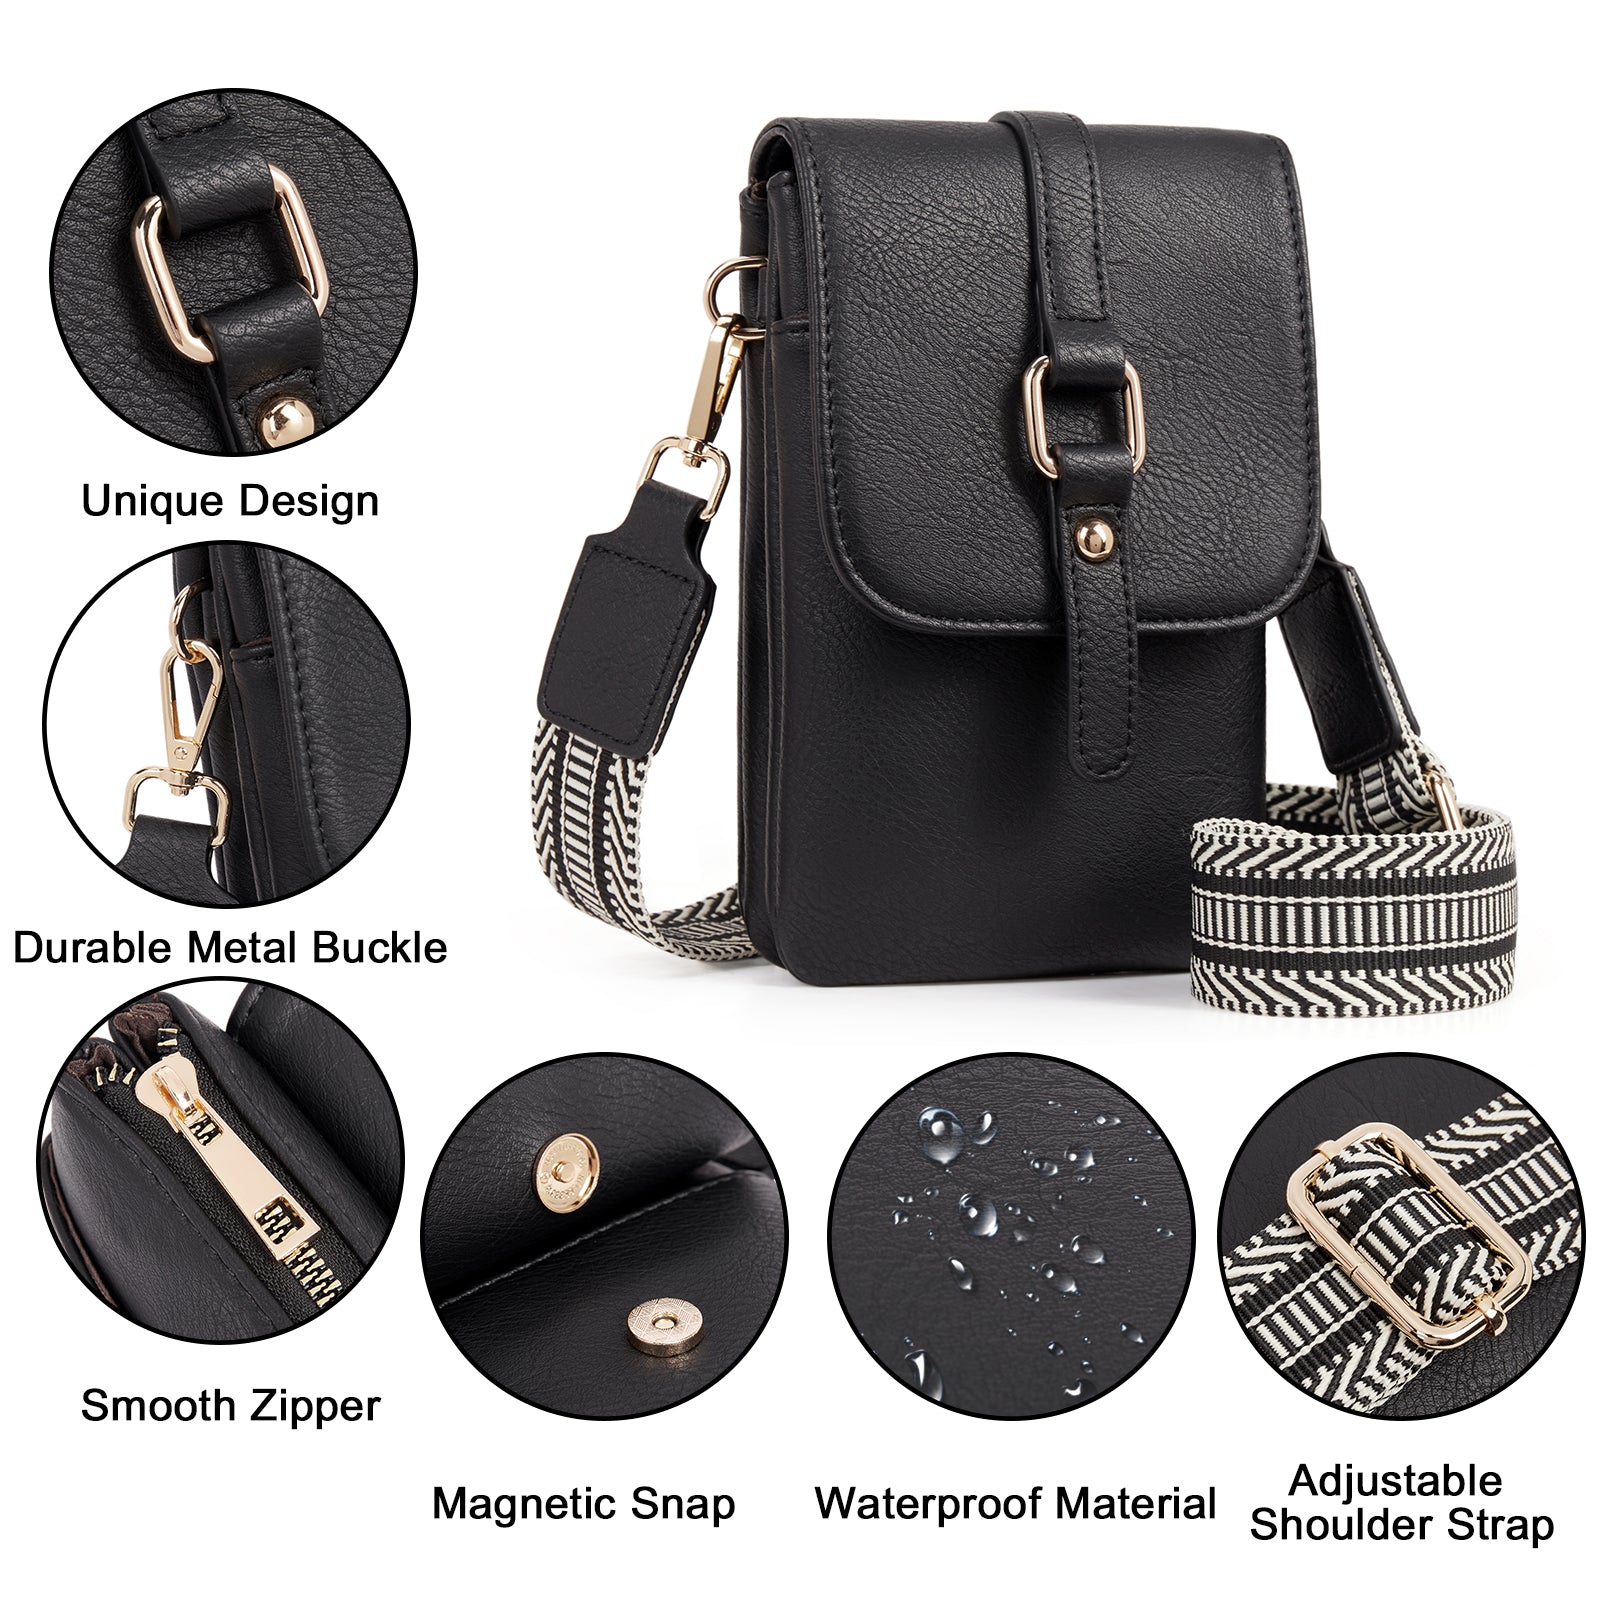 CLUCI Small Crossbody Bags for Women Trendy Leather Cell Phone Shoulder Purses with Adjustable Strap